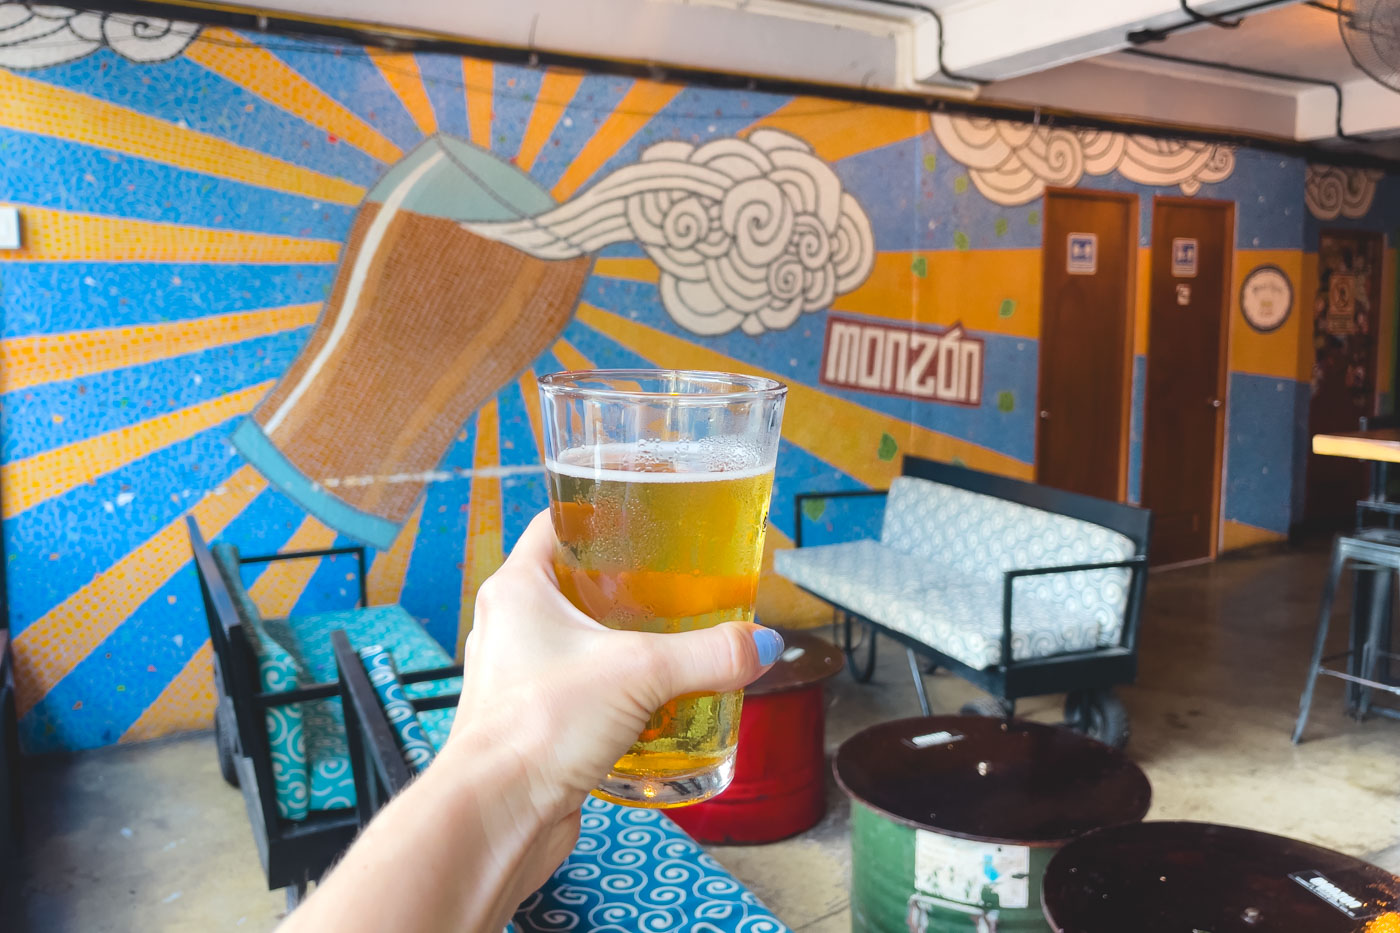 Nina's hand holding a pint of craft beer in front of a giant beer mural inside Monzon Brewery.